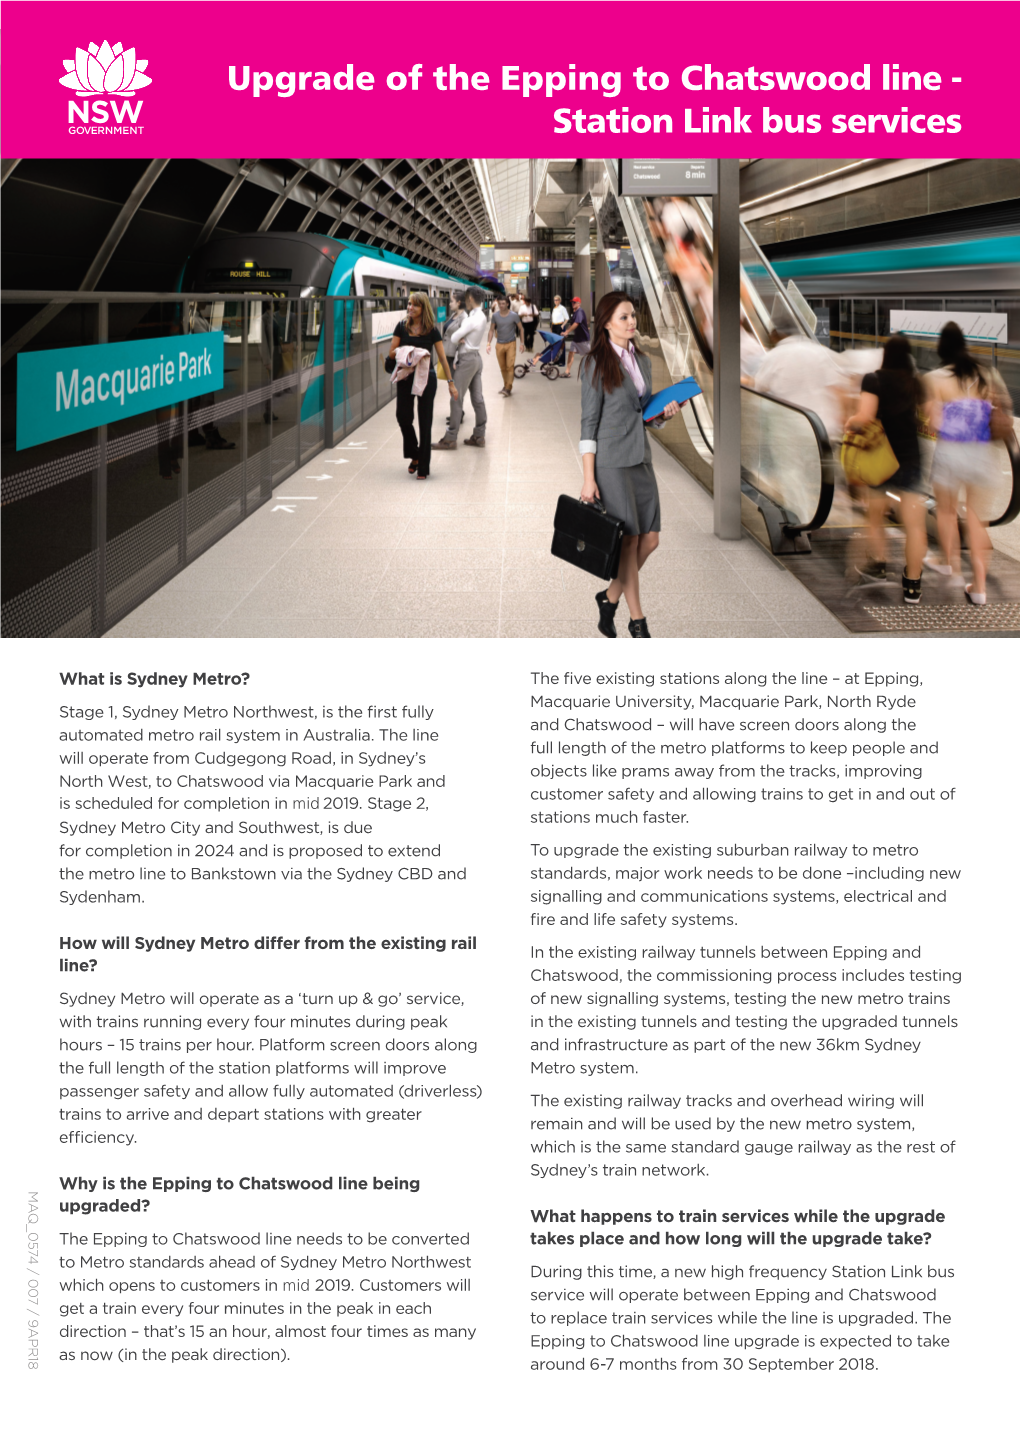 Upgrade of the Epping to Chatswood Line - Station Link Bus Services